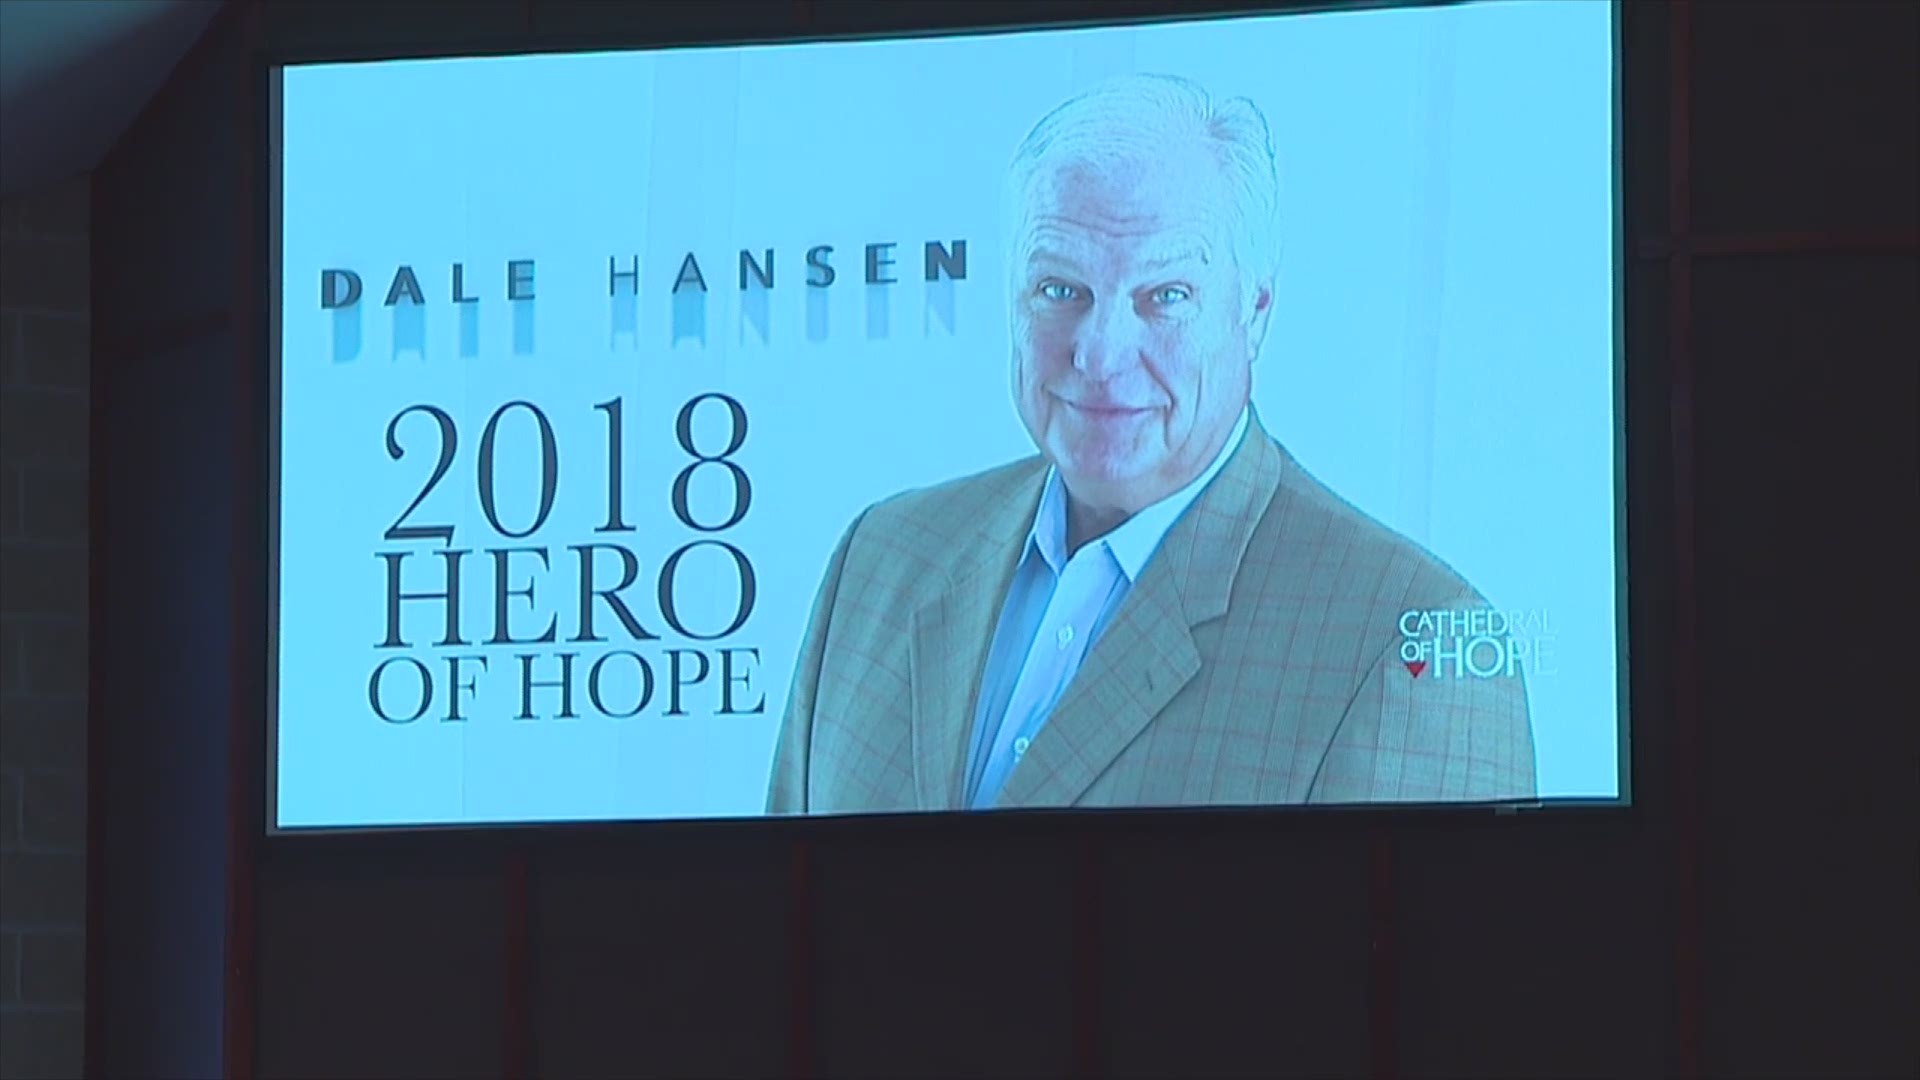 The Cathedral of Hope in Dallas awarded WFAA's Dale Hansen with its Hero of Hope honor this weekend